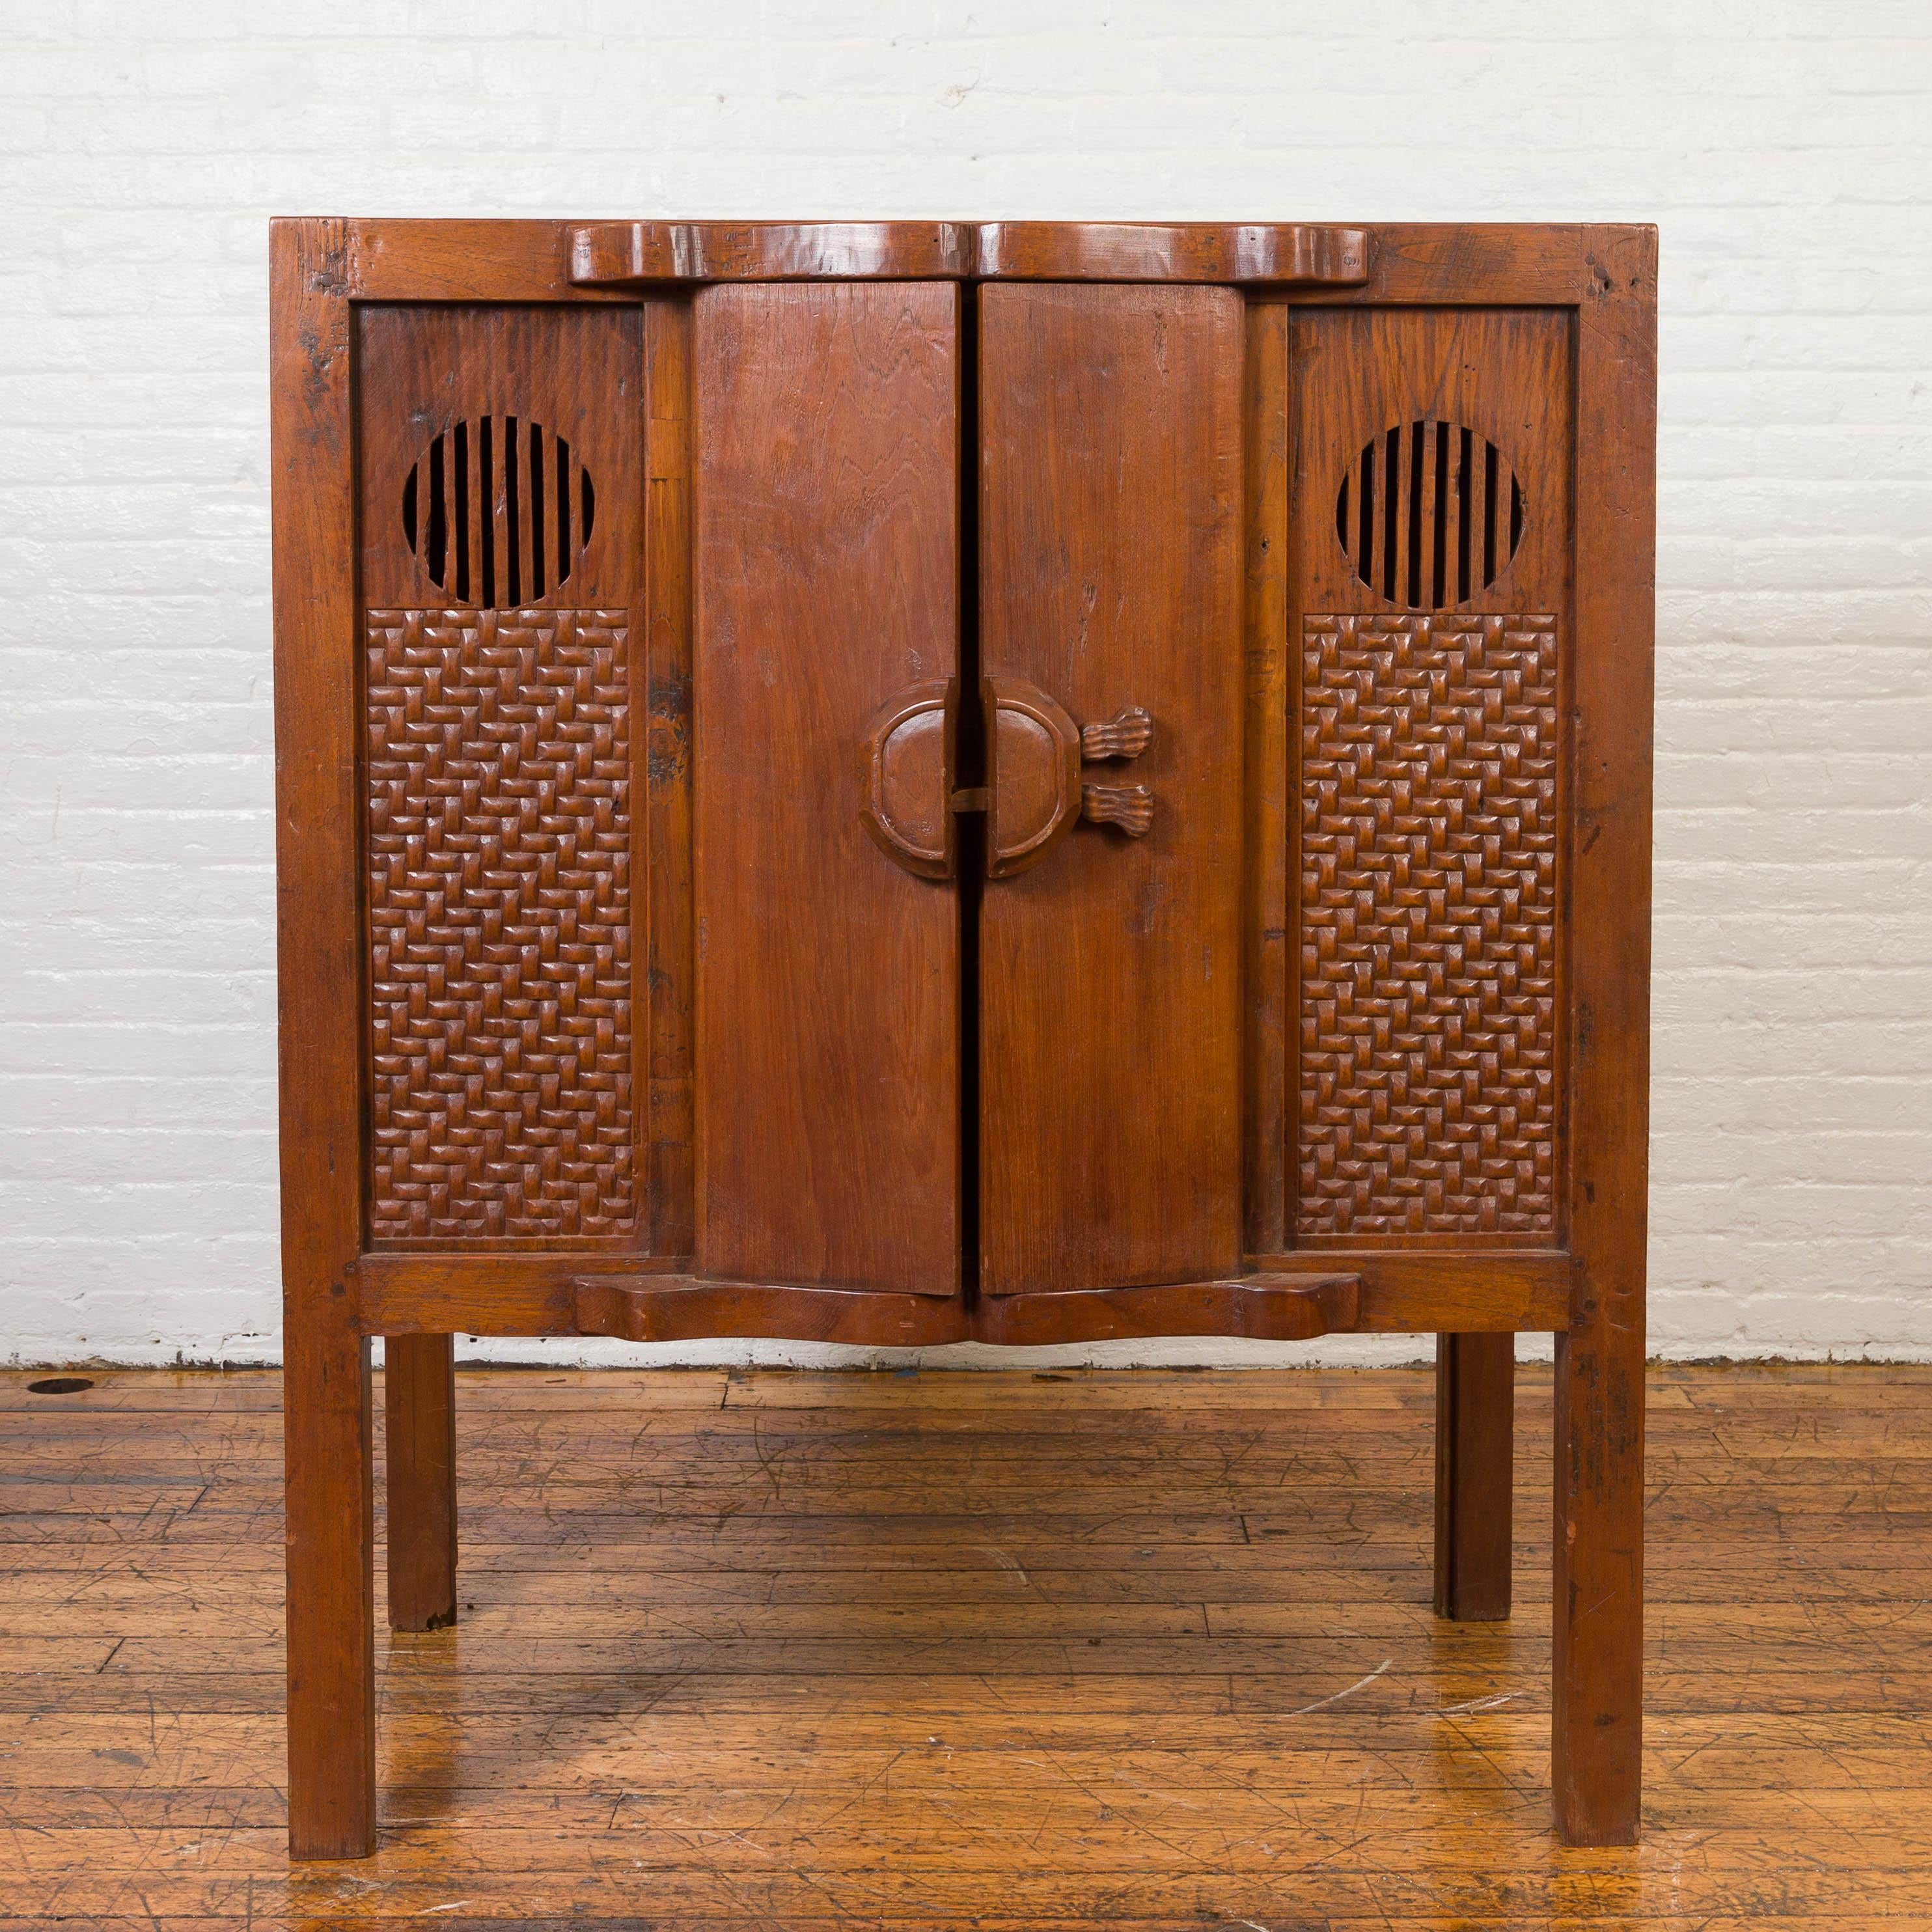 A vintage Chinese wooden cabinet on legs from the mid-20th century, with two doors and carved panels. Showcasing a linear Silhouette and a brown patina, this Chinese cabinet features two narrow doors in the center of its façade, closing thanks to a